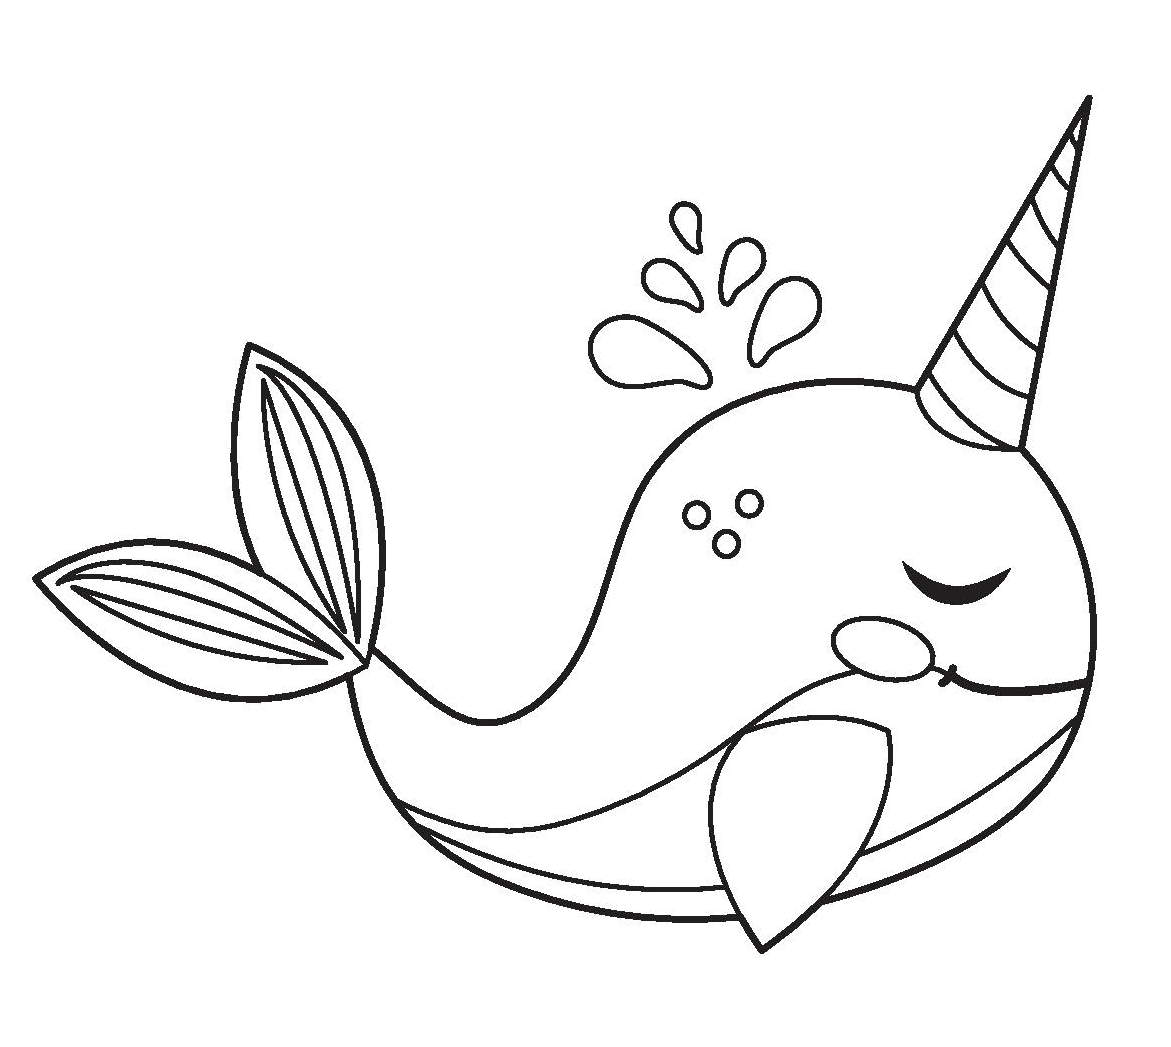 Cute Narwhal Coloring Pages   Narwhal Coloring Pages   Coloring ...